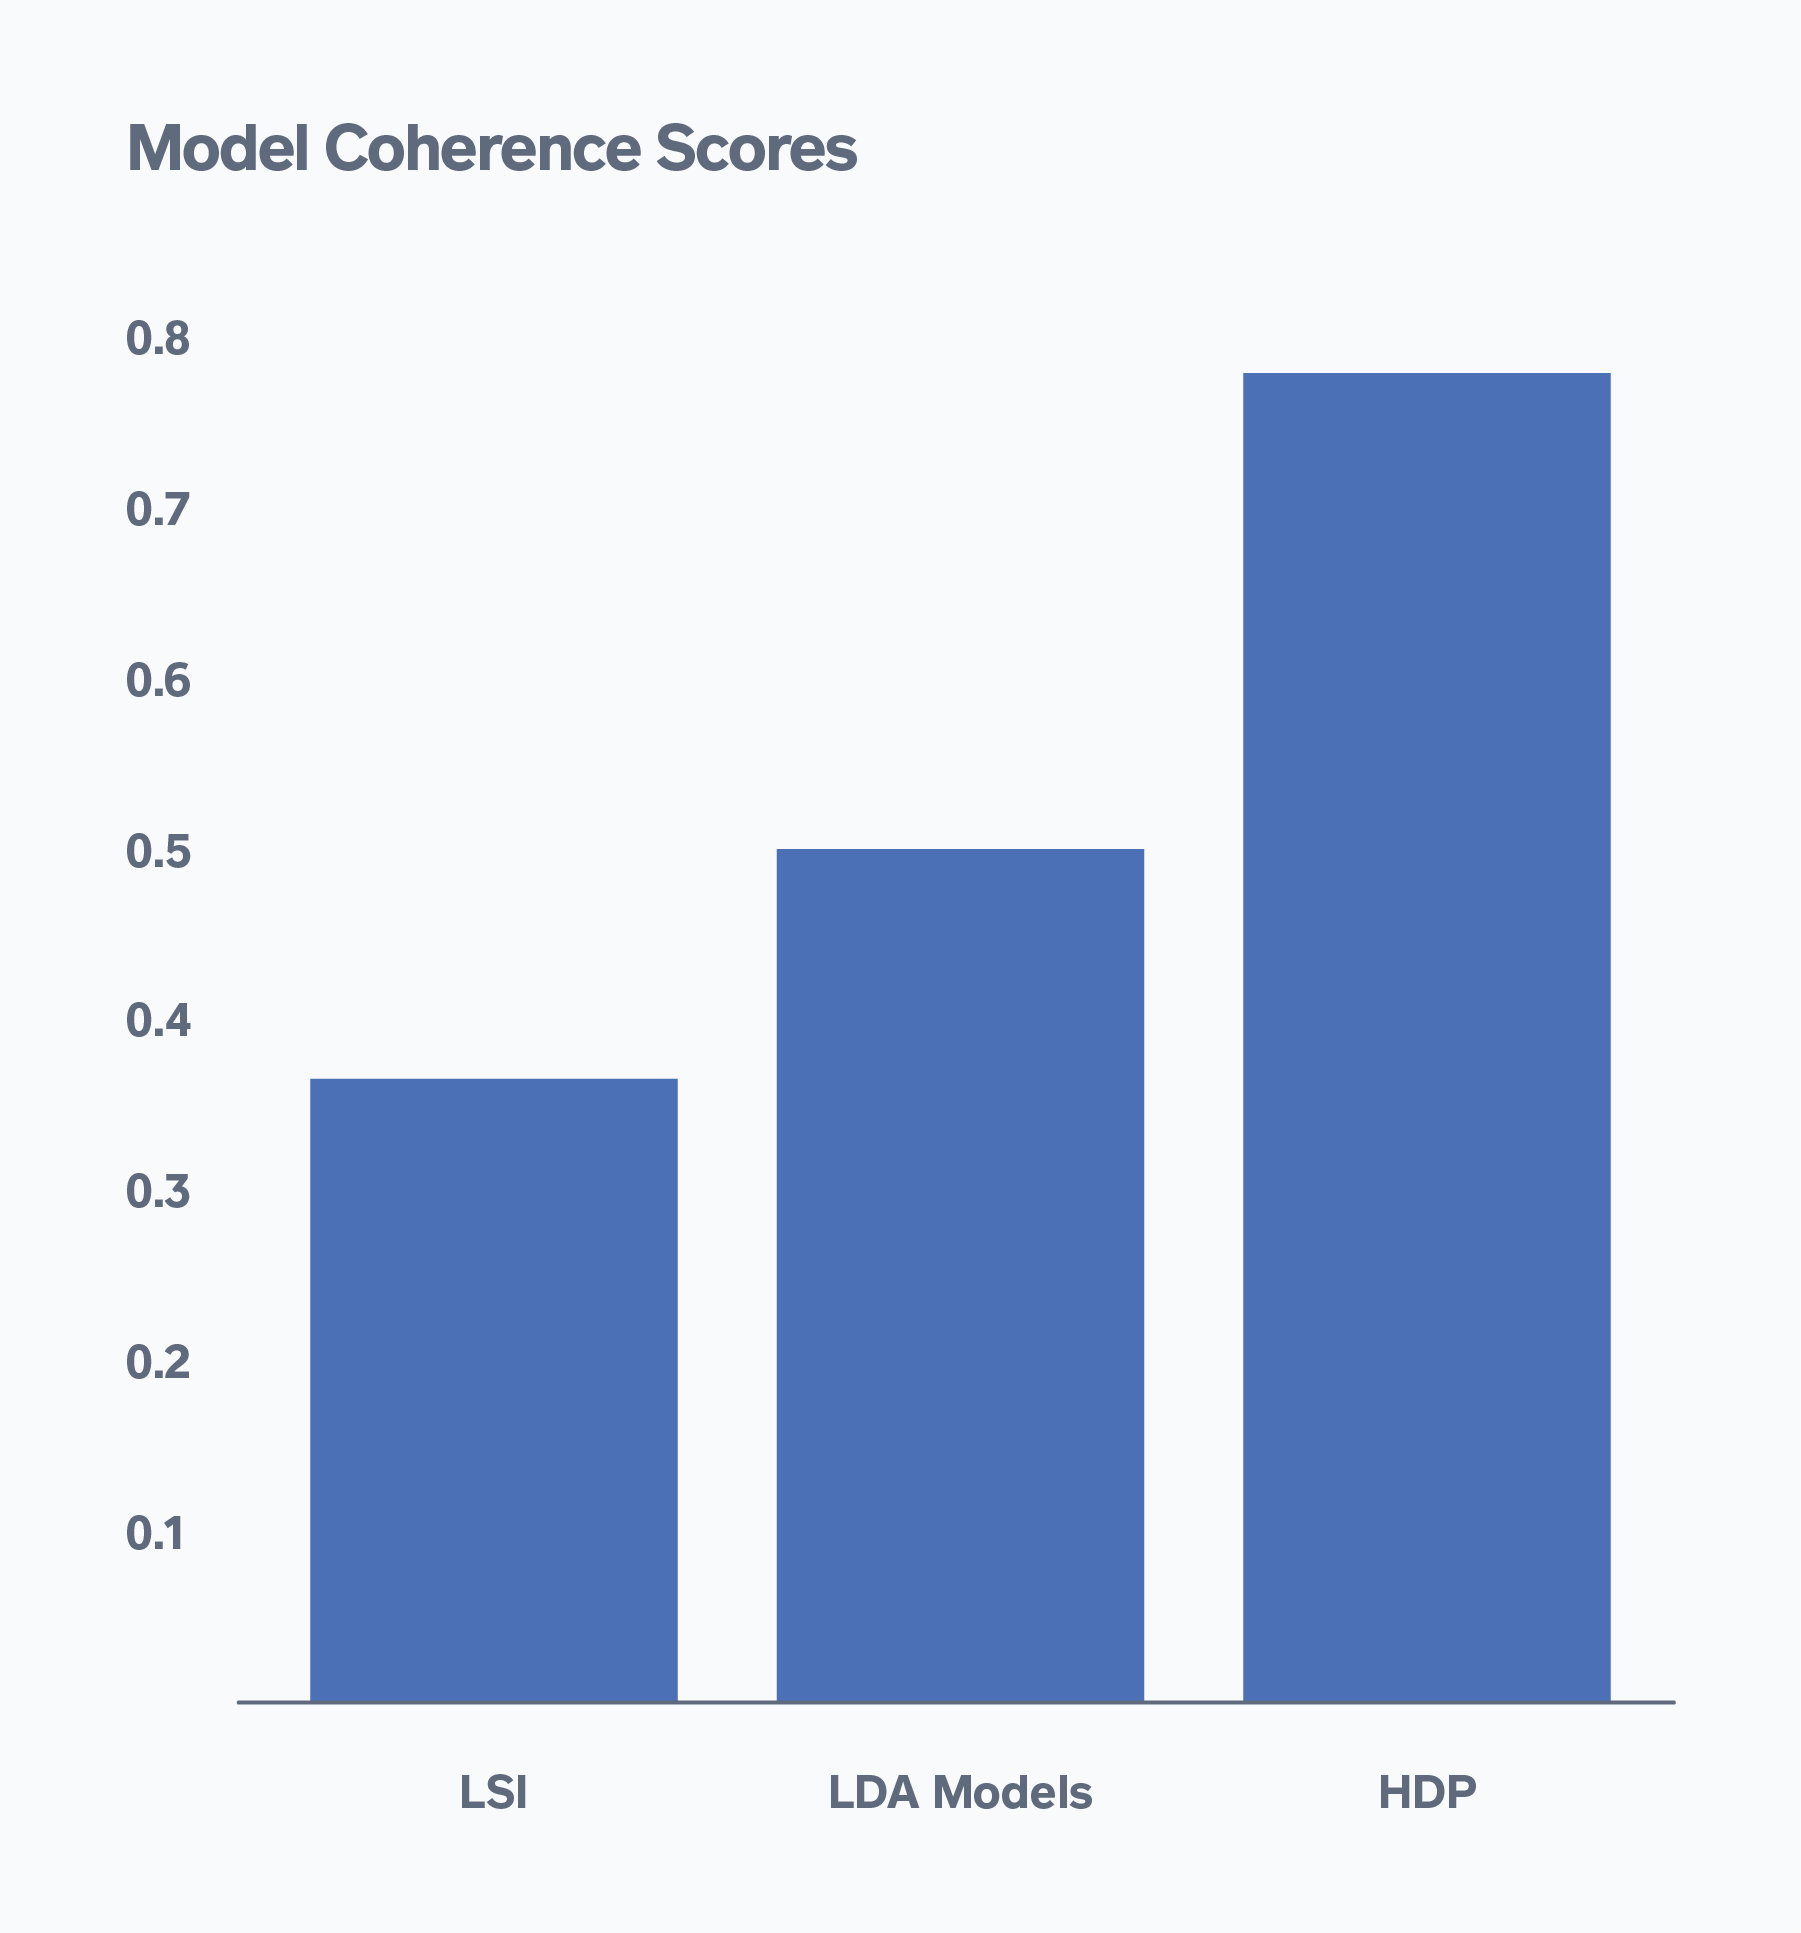 Figure 5: Model Coherence Scores Across Various Topic Models